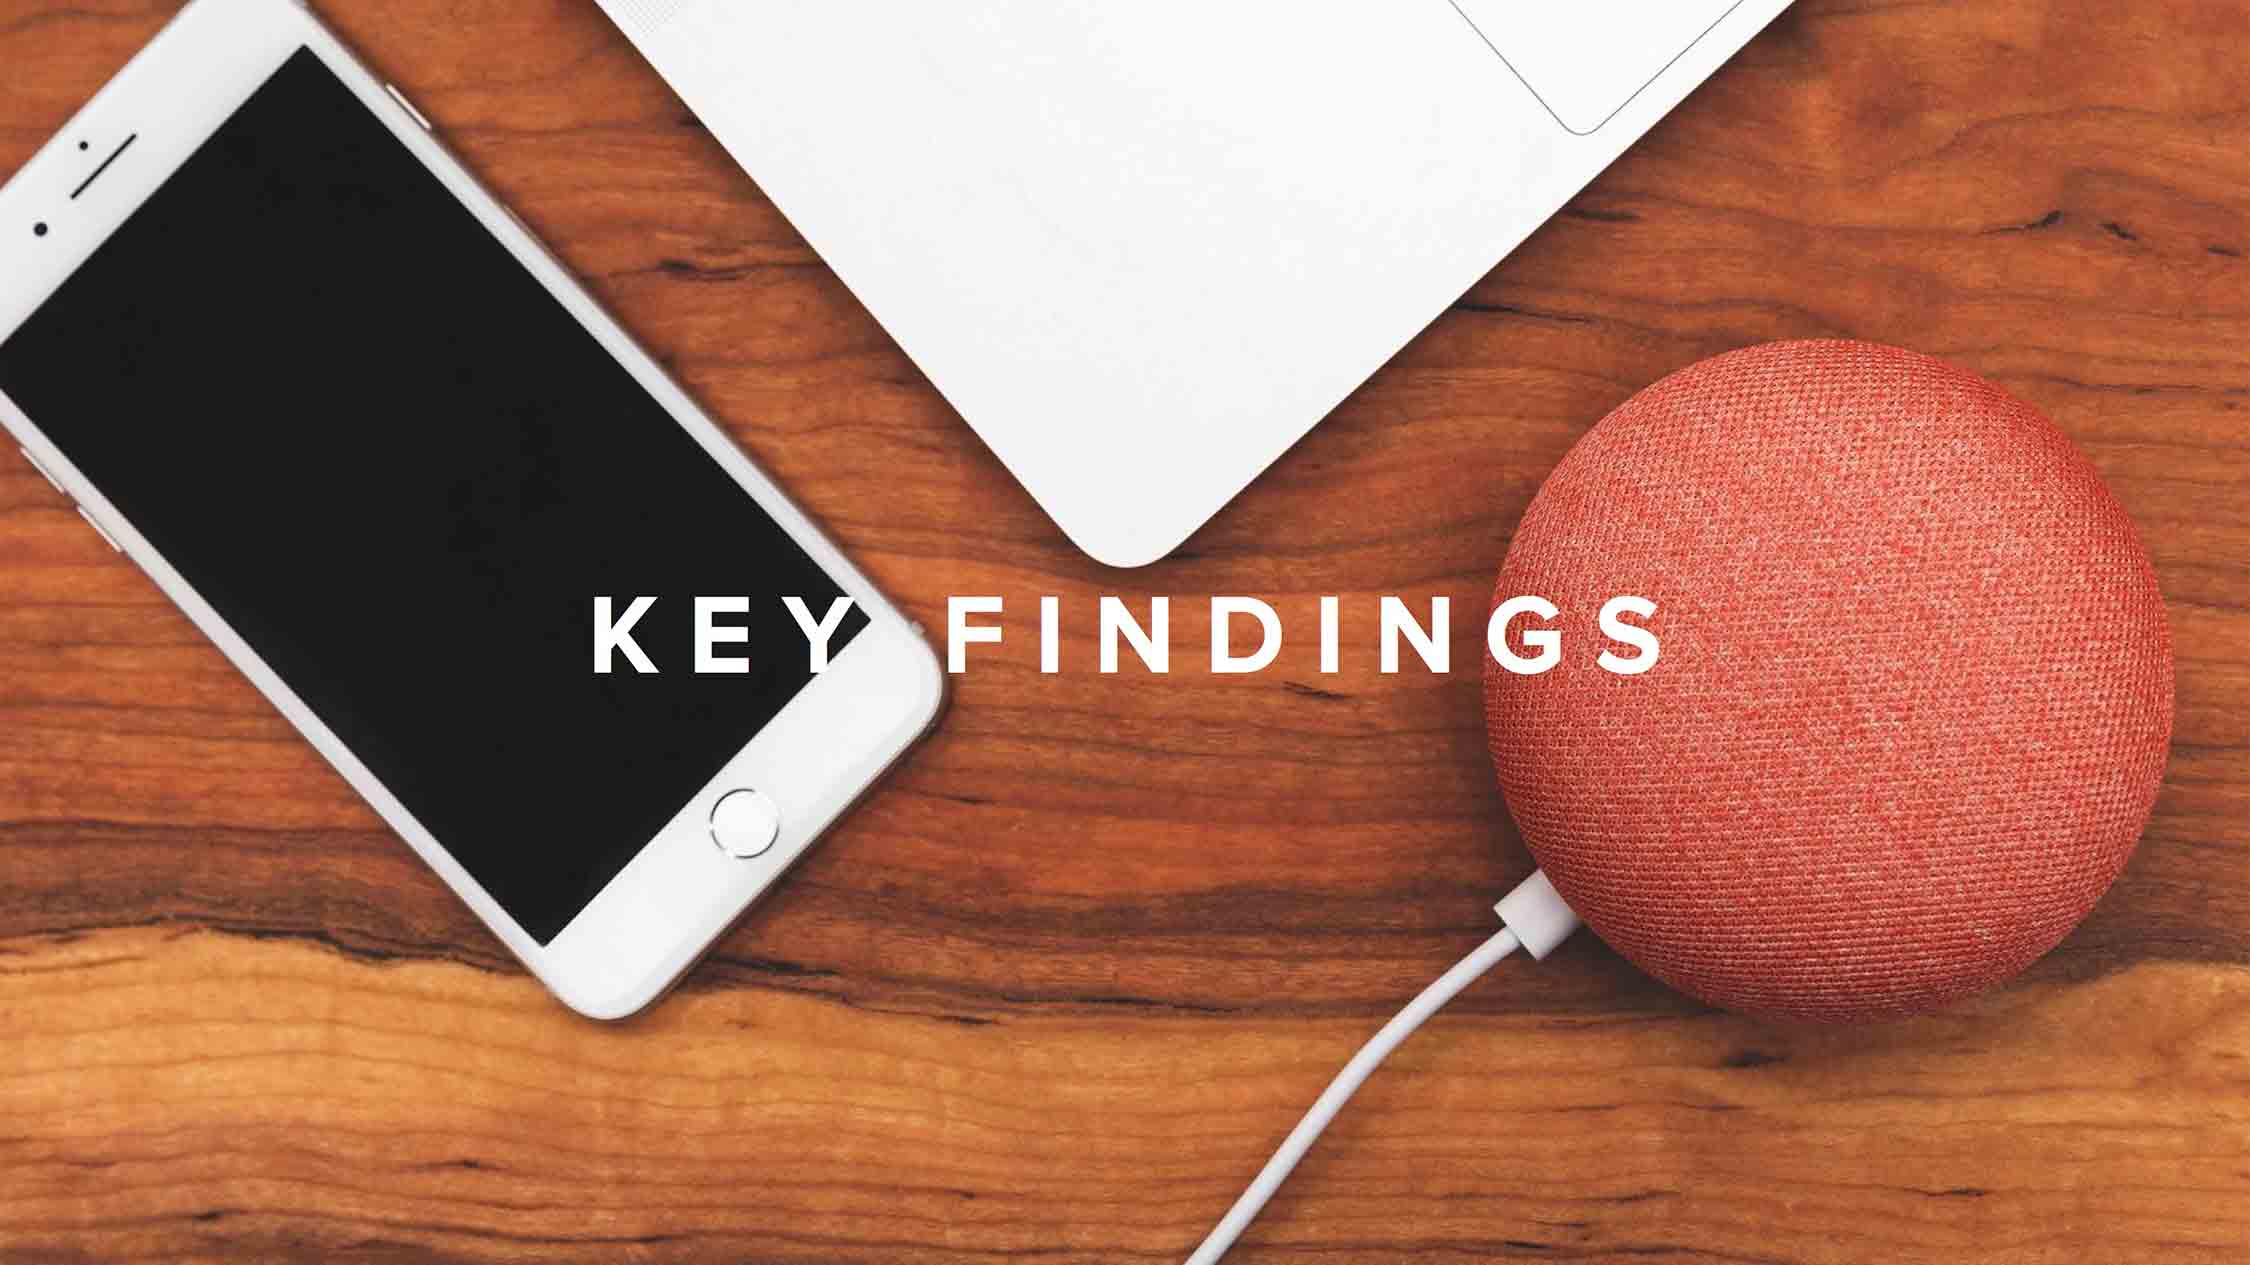 "Key Findings" written atop an iPhone, MacBook, and Google Home Mini.